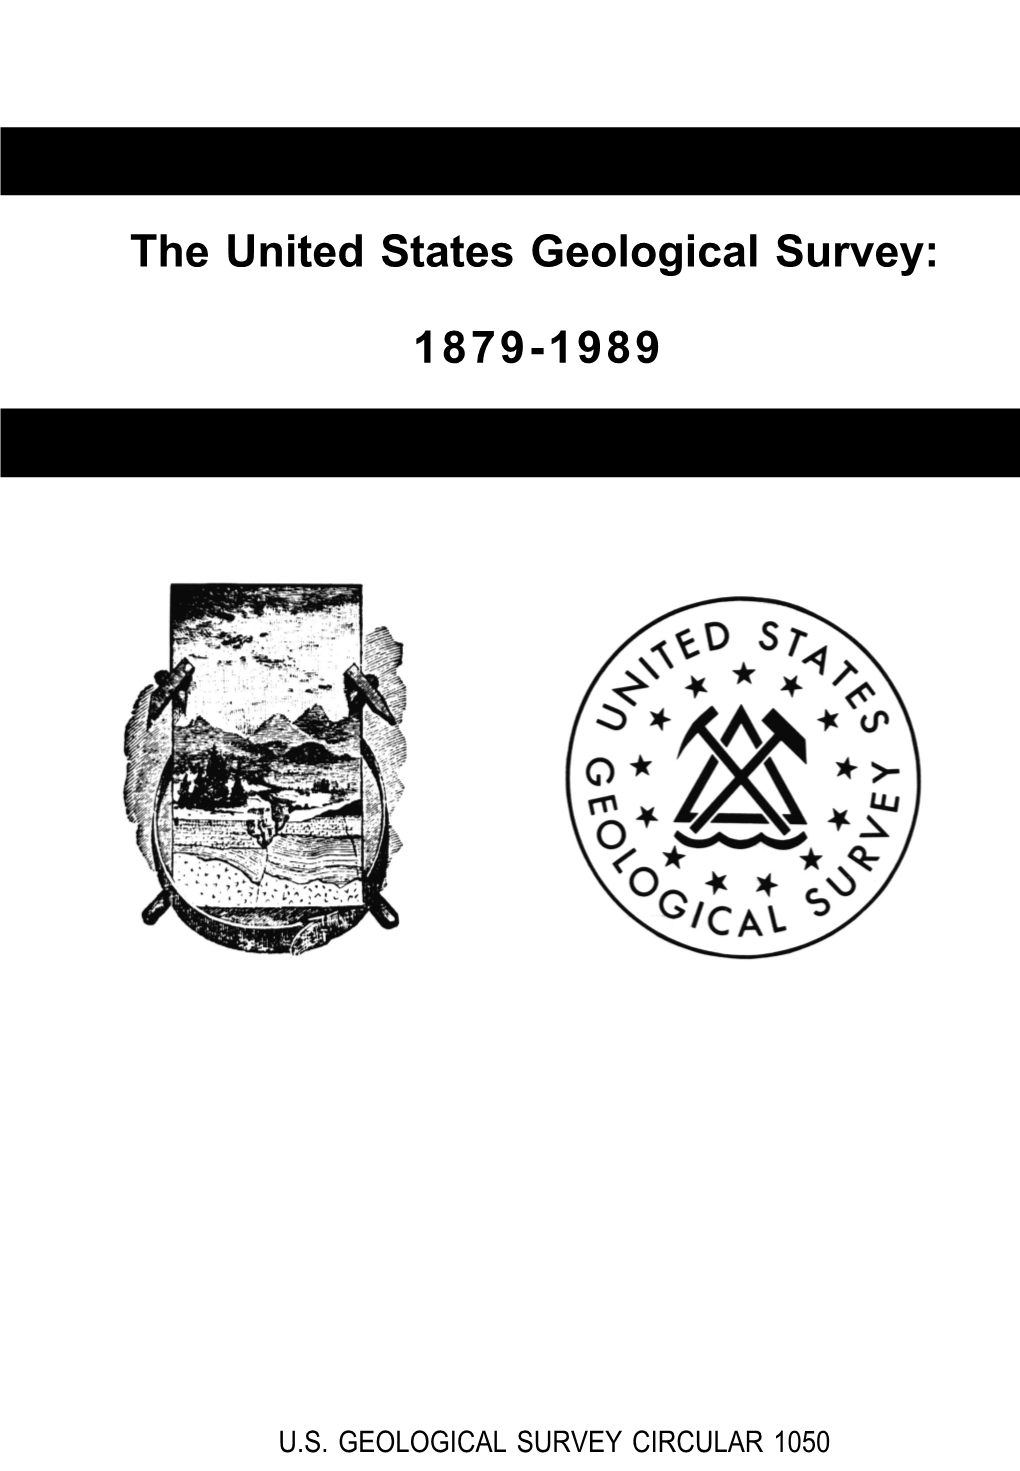 The United States Geological Survey: 1879-1989